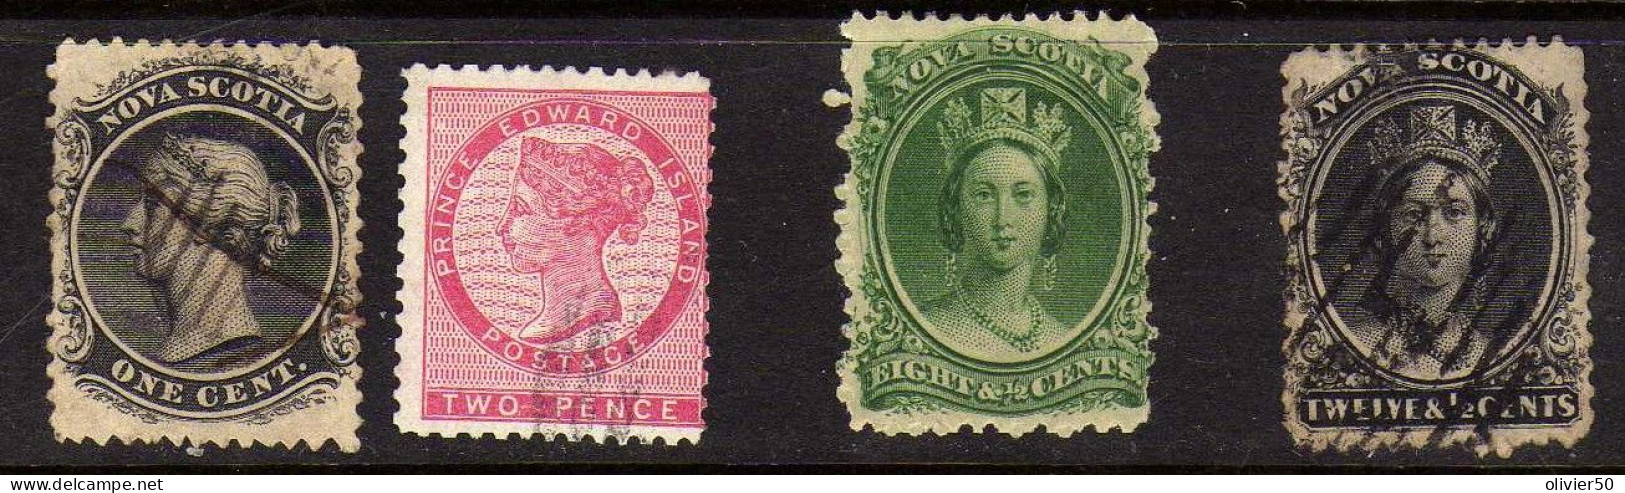 Nouvelle-Ecosse - Prince Edouard (1860-69) -  Victoria - Oblit  - Et Neuf* - MH - Unused Stamps